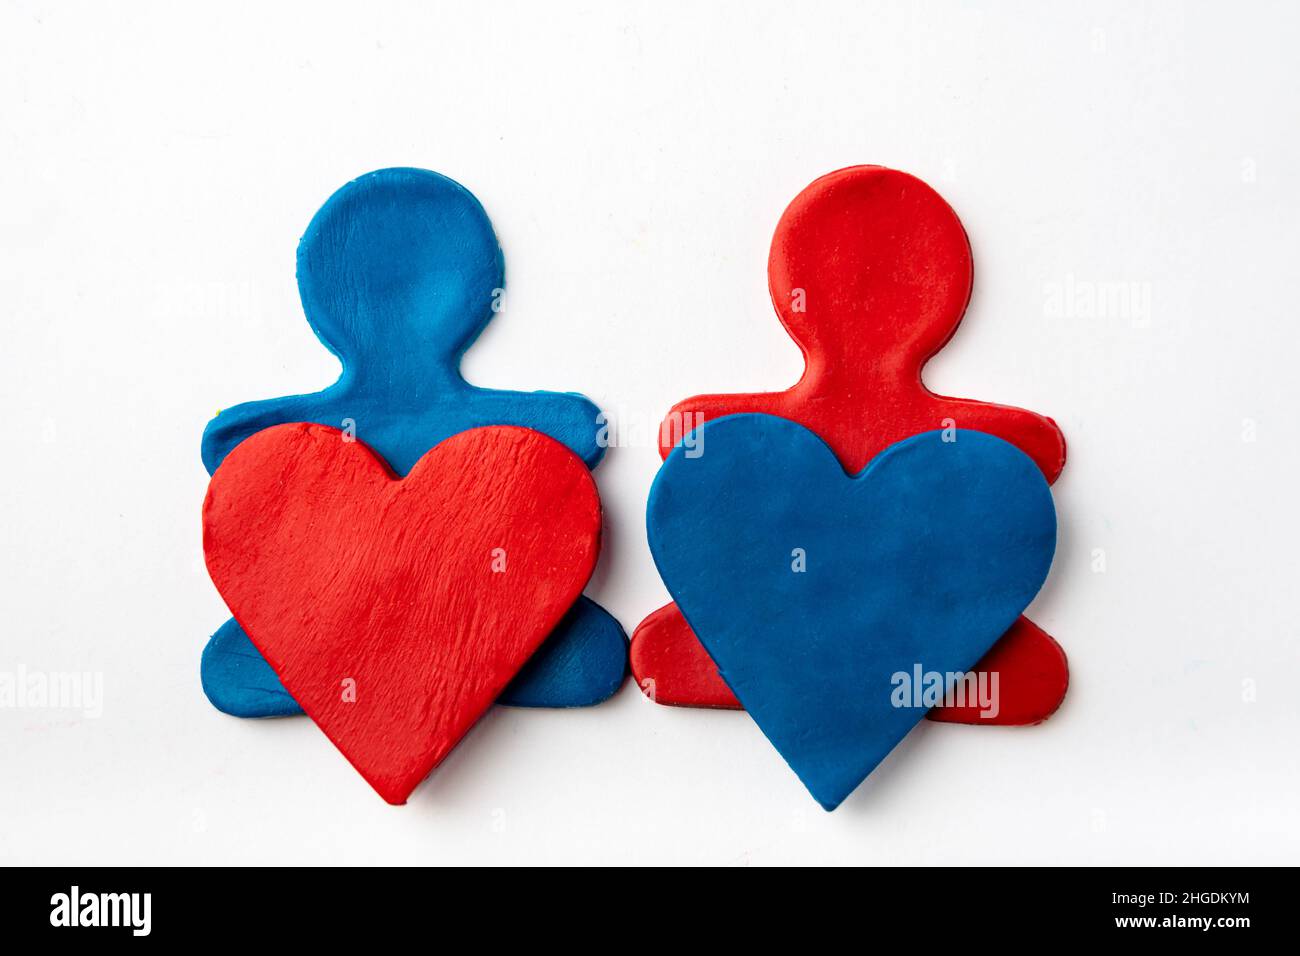 A man made of blue plasticine holds a red plasticine heart in his hands and a man made of red plasticine holds a blue plasticine heart on a white back Stock Photo